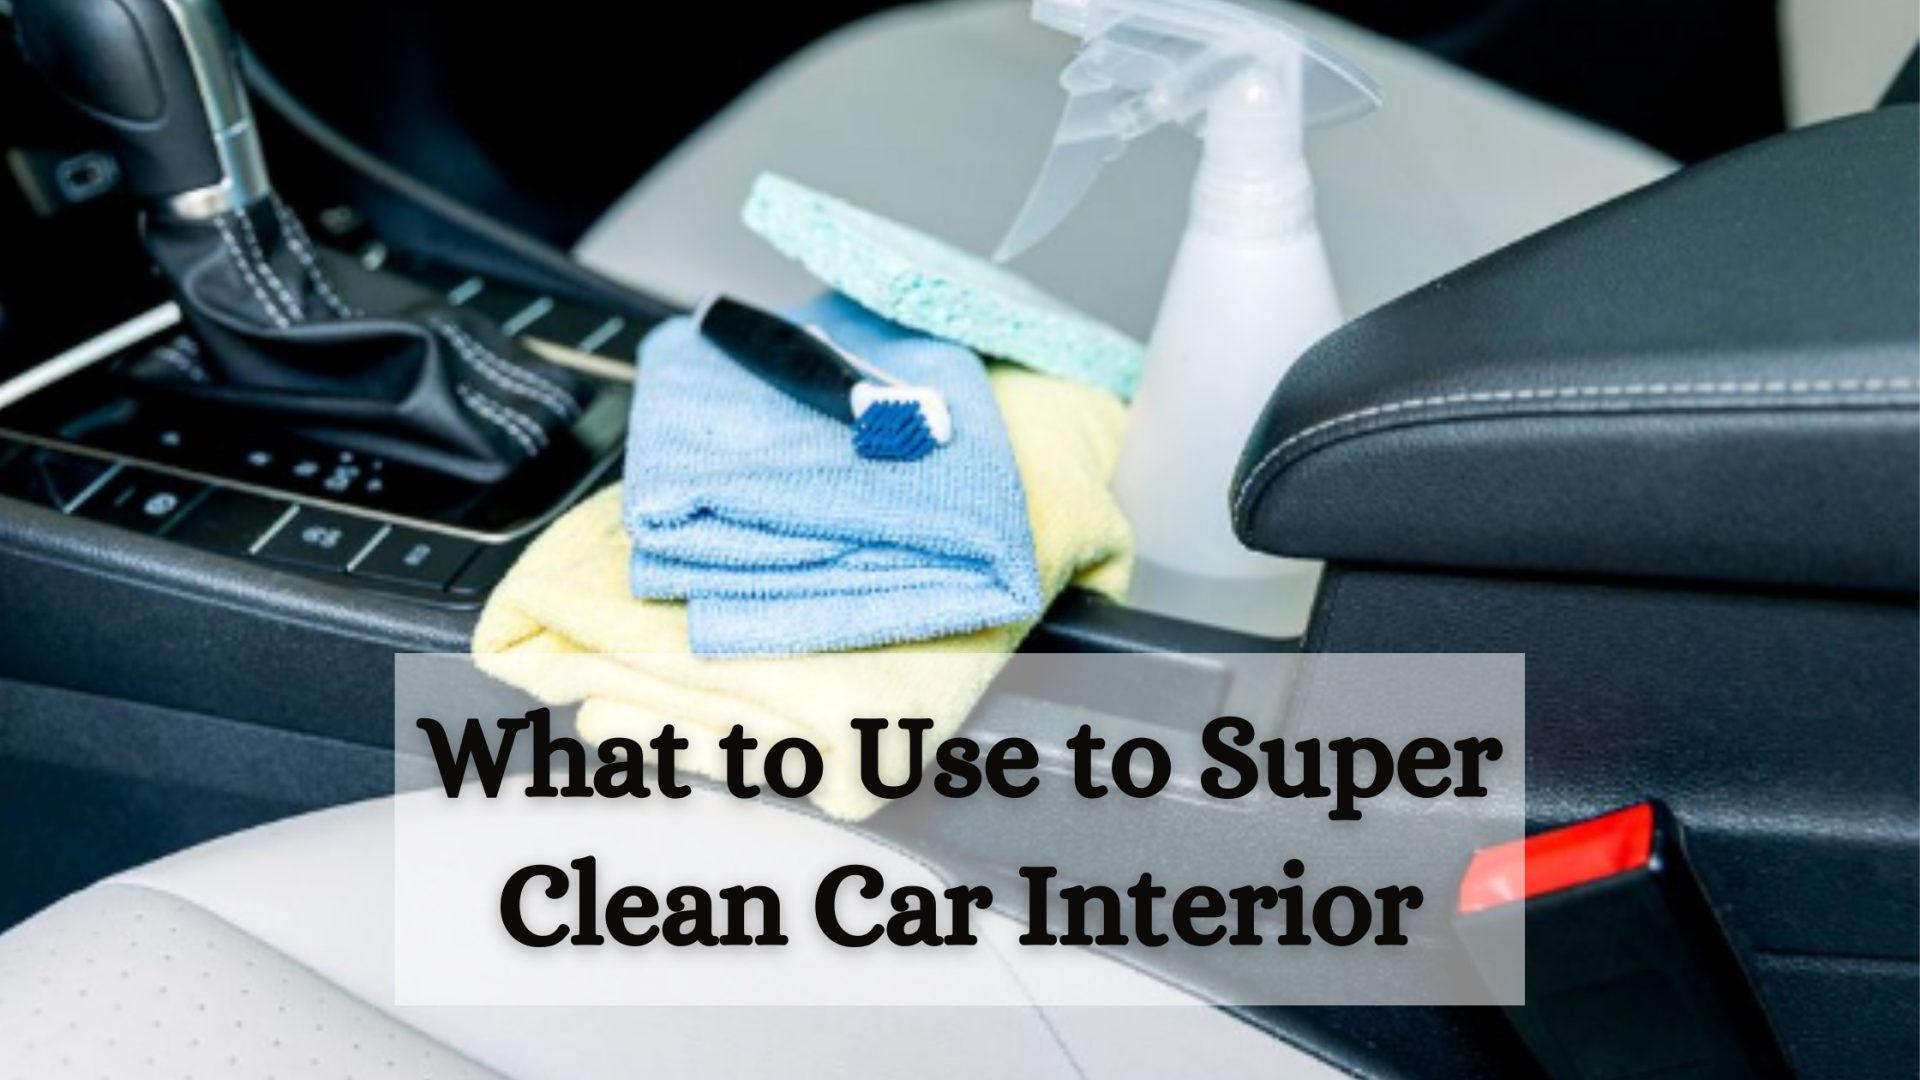 What to Use to Clean Car Interior